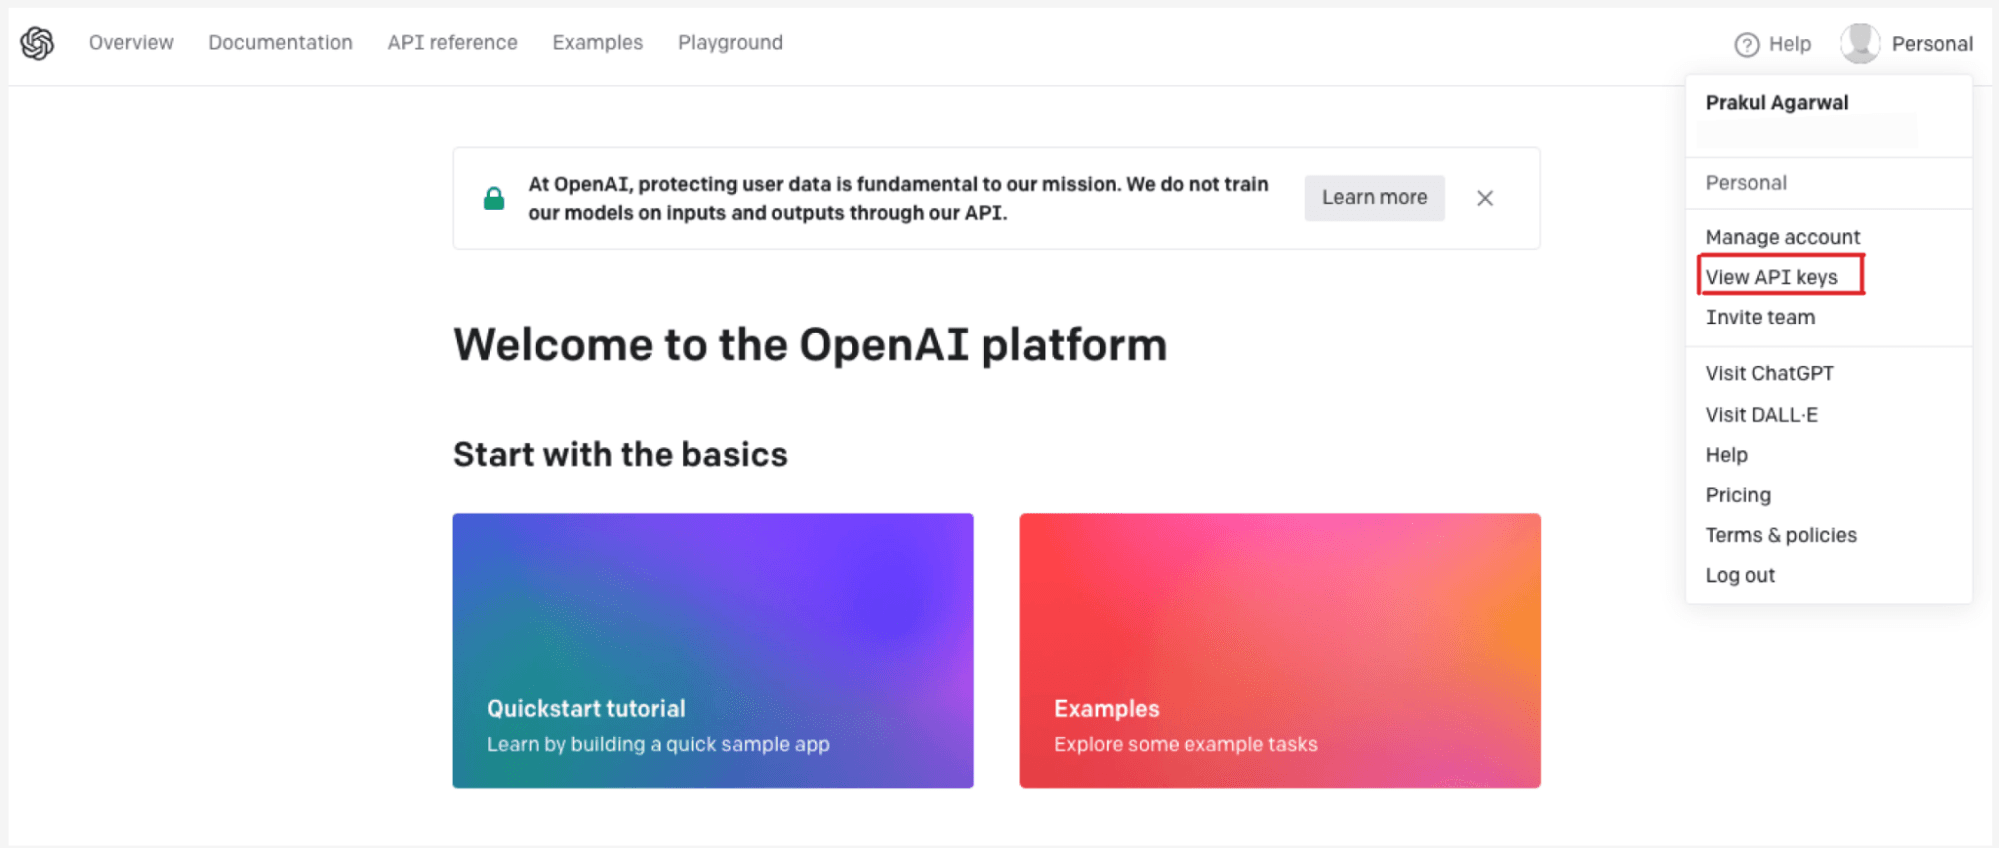 OpenAI platform page with a focus on "View API keys" in the menu